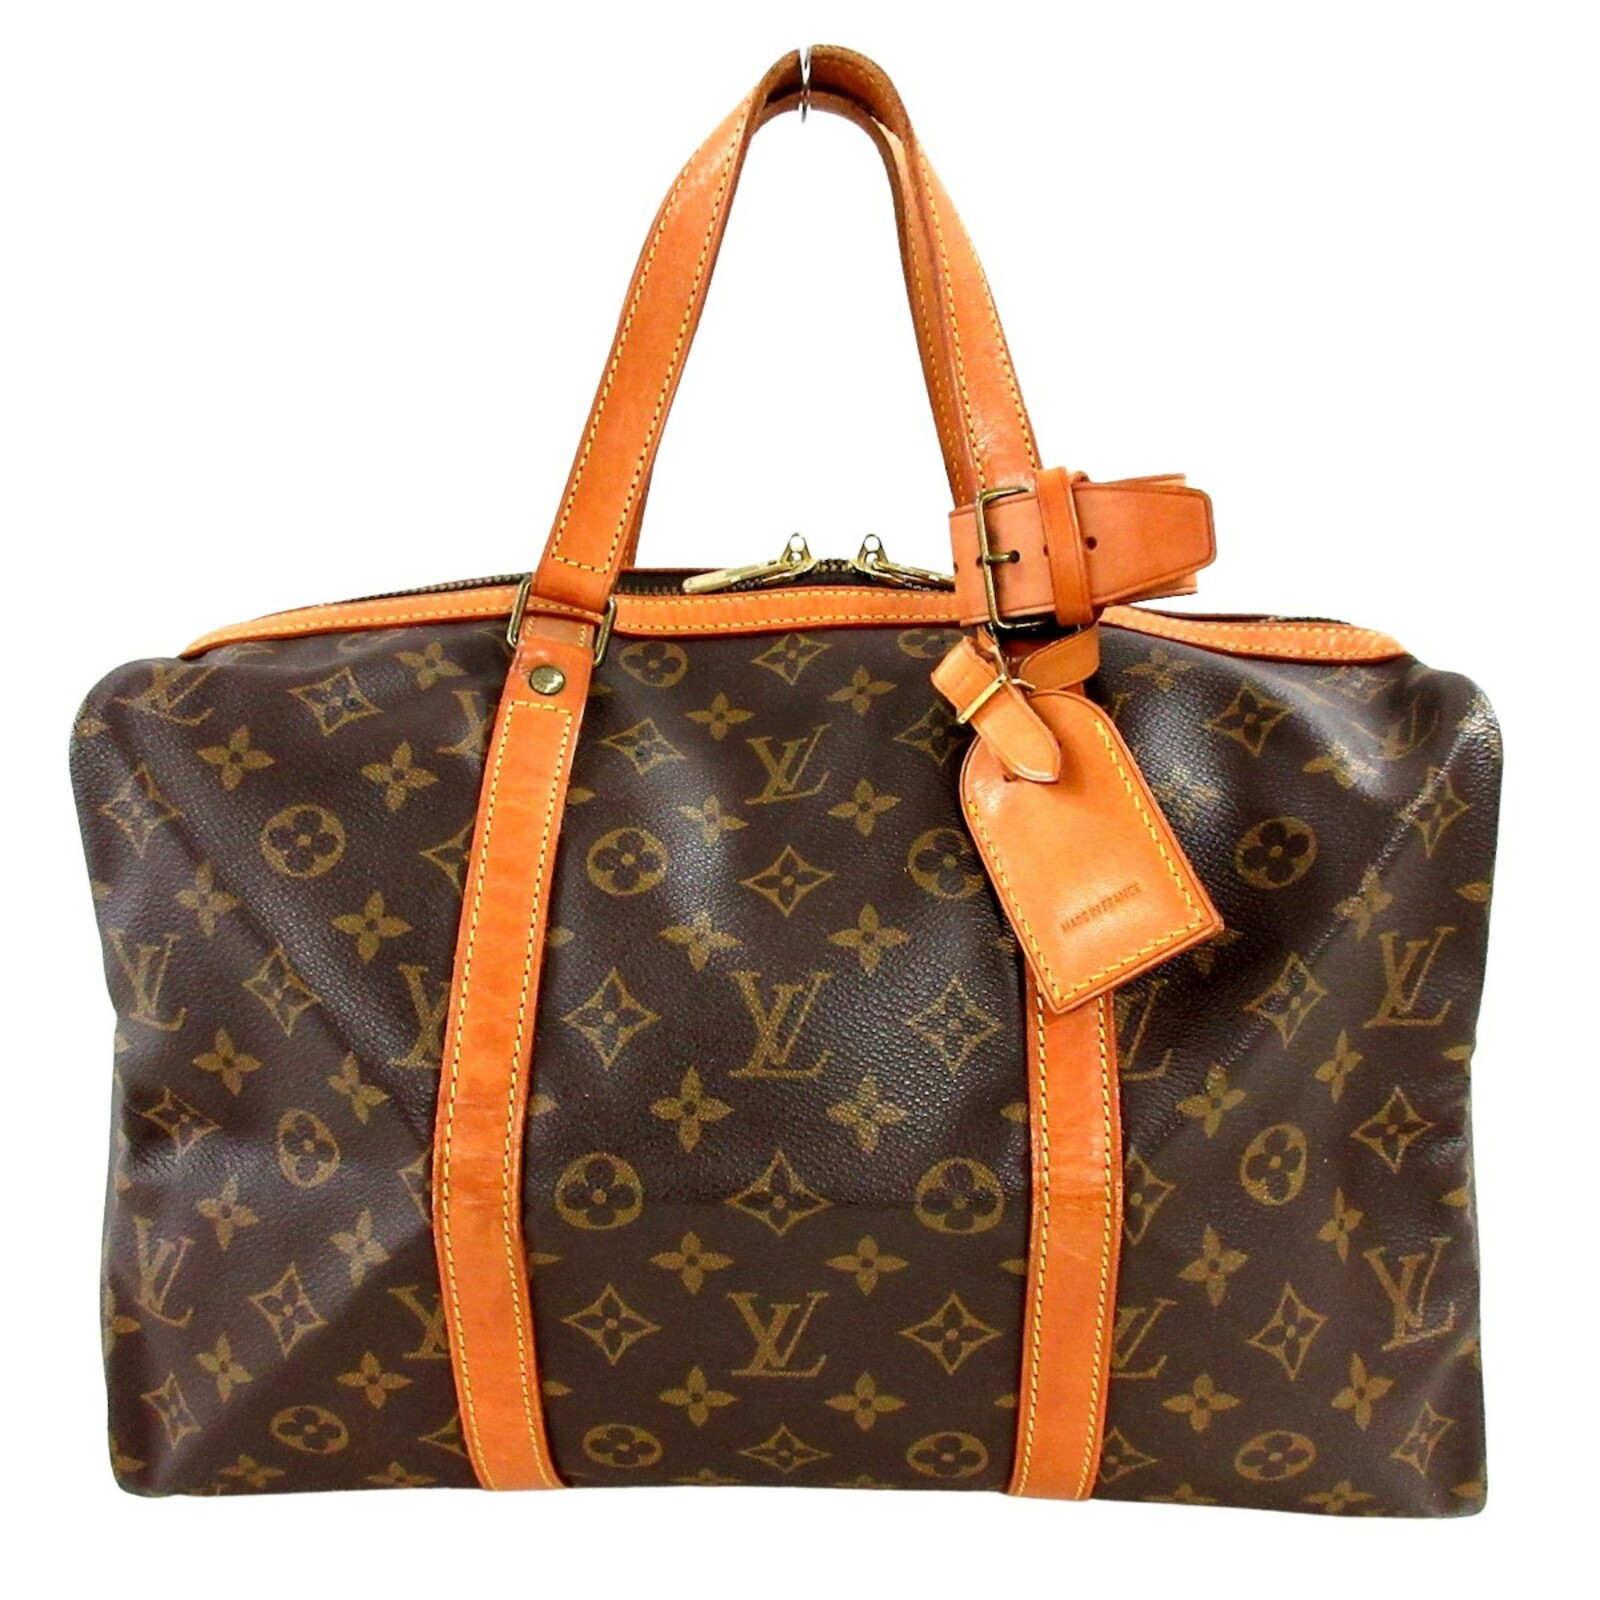 Louis Vuitton Travel bag Canvas in Brown - Second Hand Louis Vuitton Travel  bag Canvas in Brown buy used for 755€ (7675538)